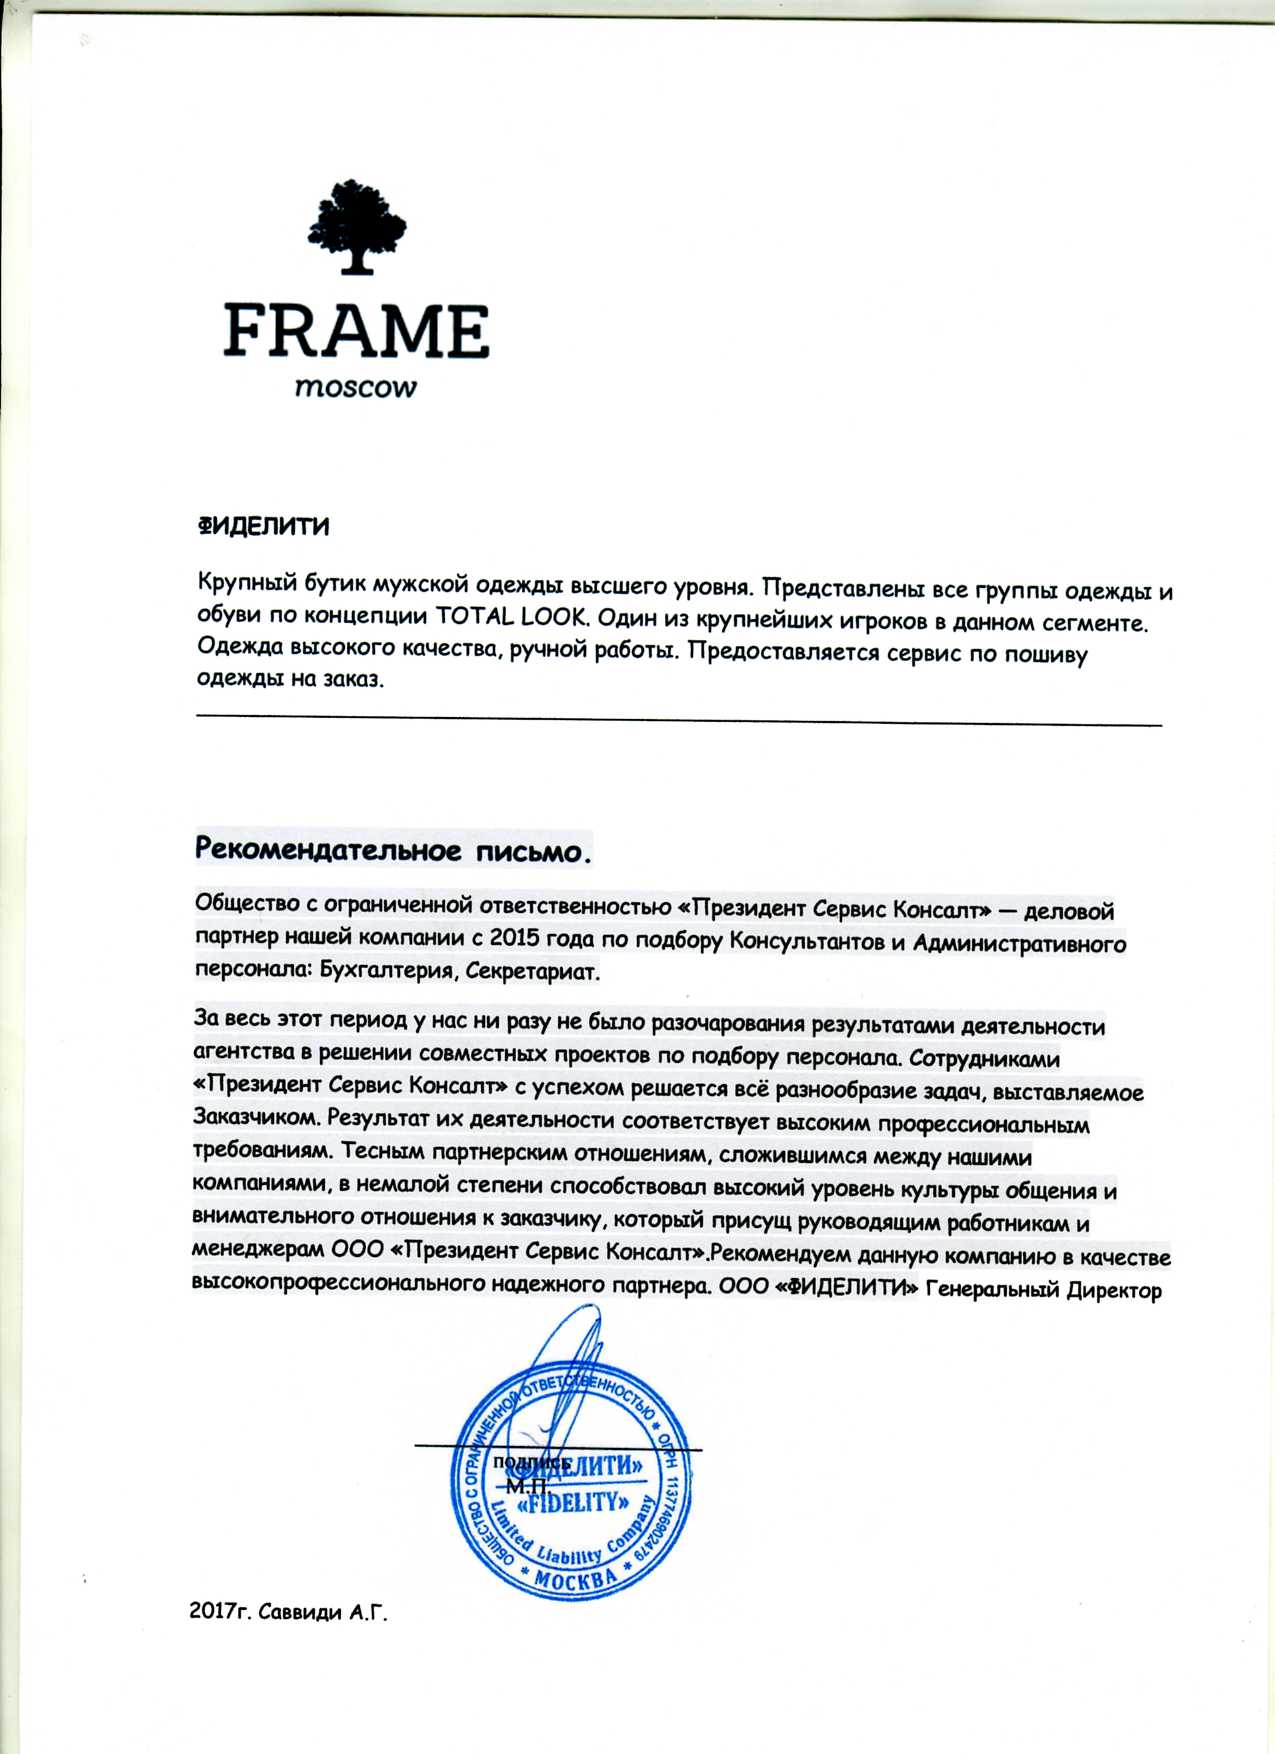 Frame Moscow